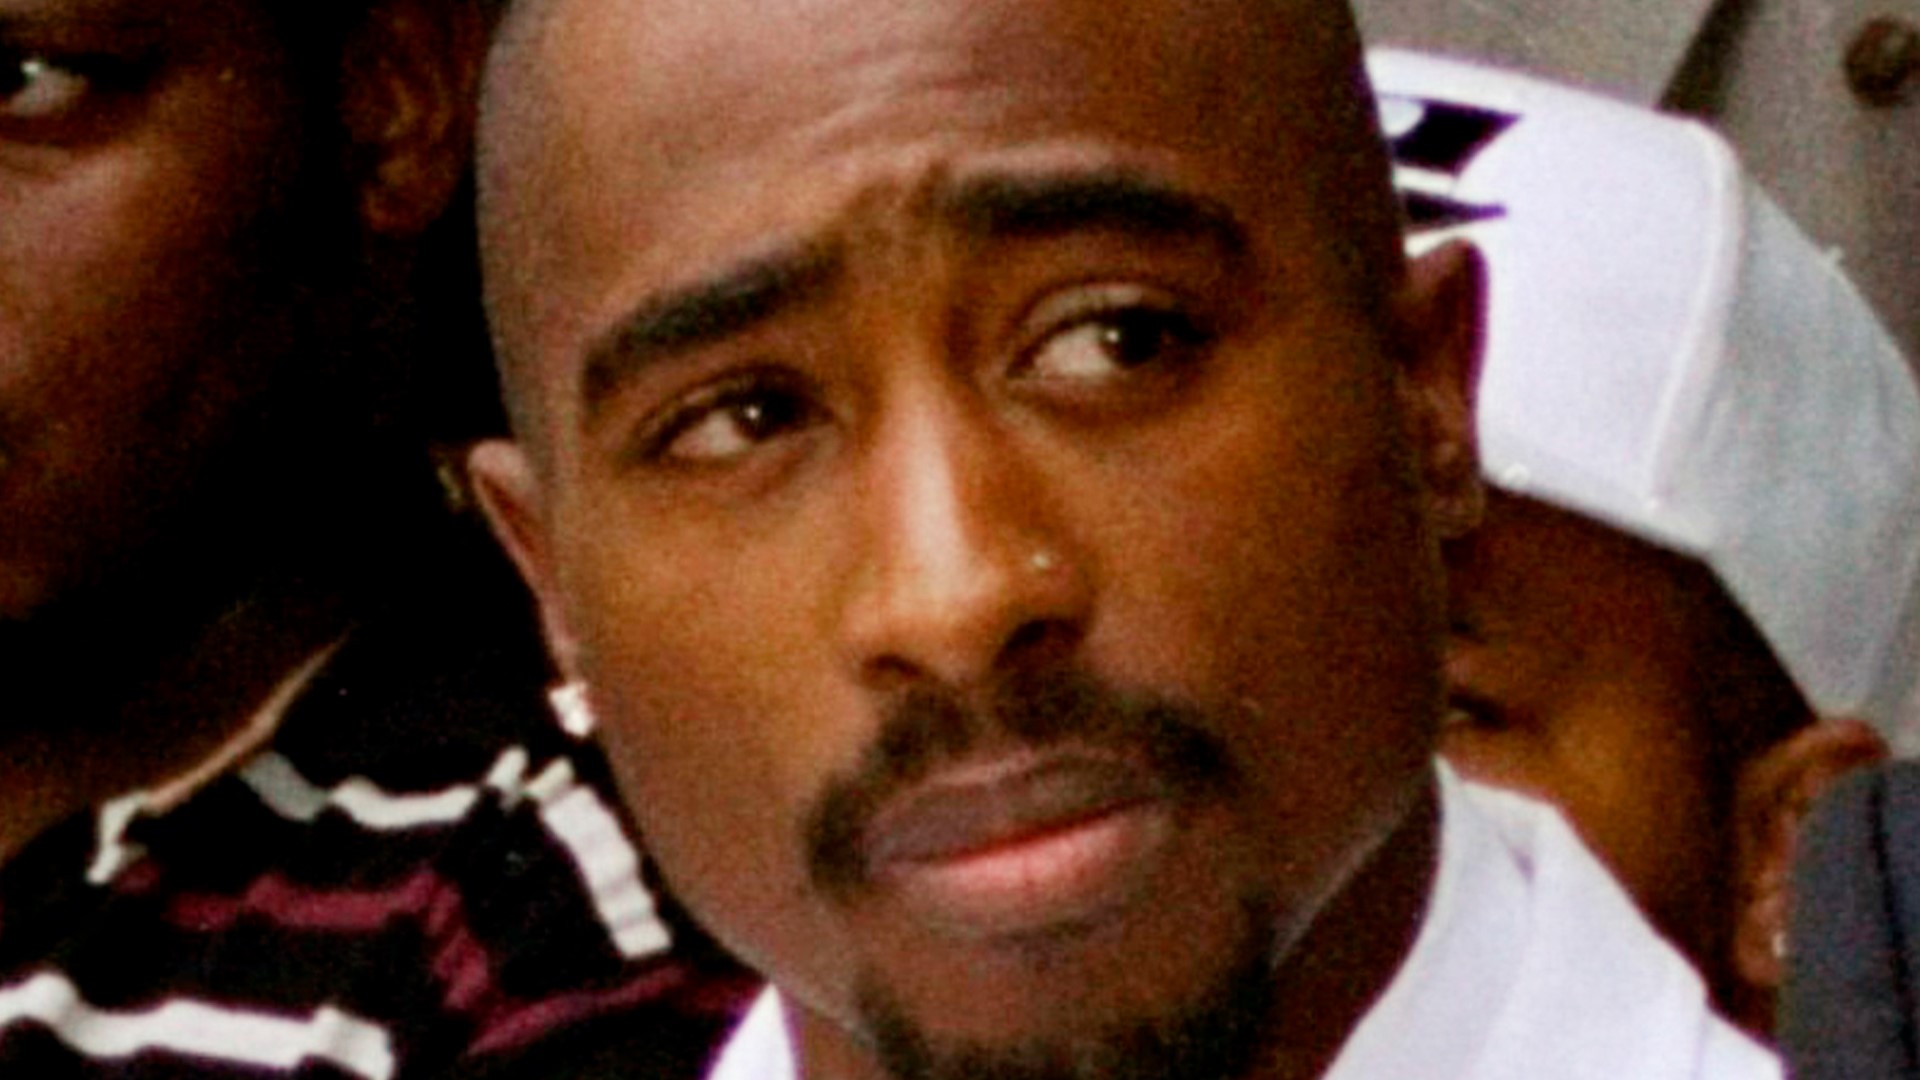 The suspect has himself admitted in interviews and in his tell-all memoir that he was in the car where the gunfire erupted from when Tupac Shakur was killed in 1996.